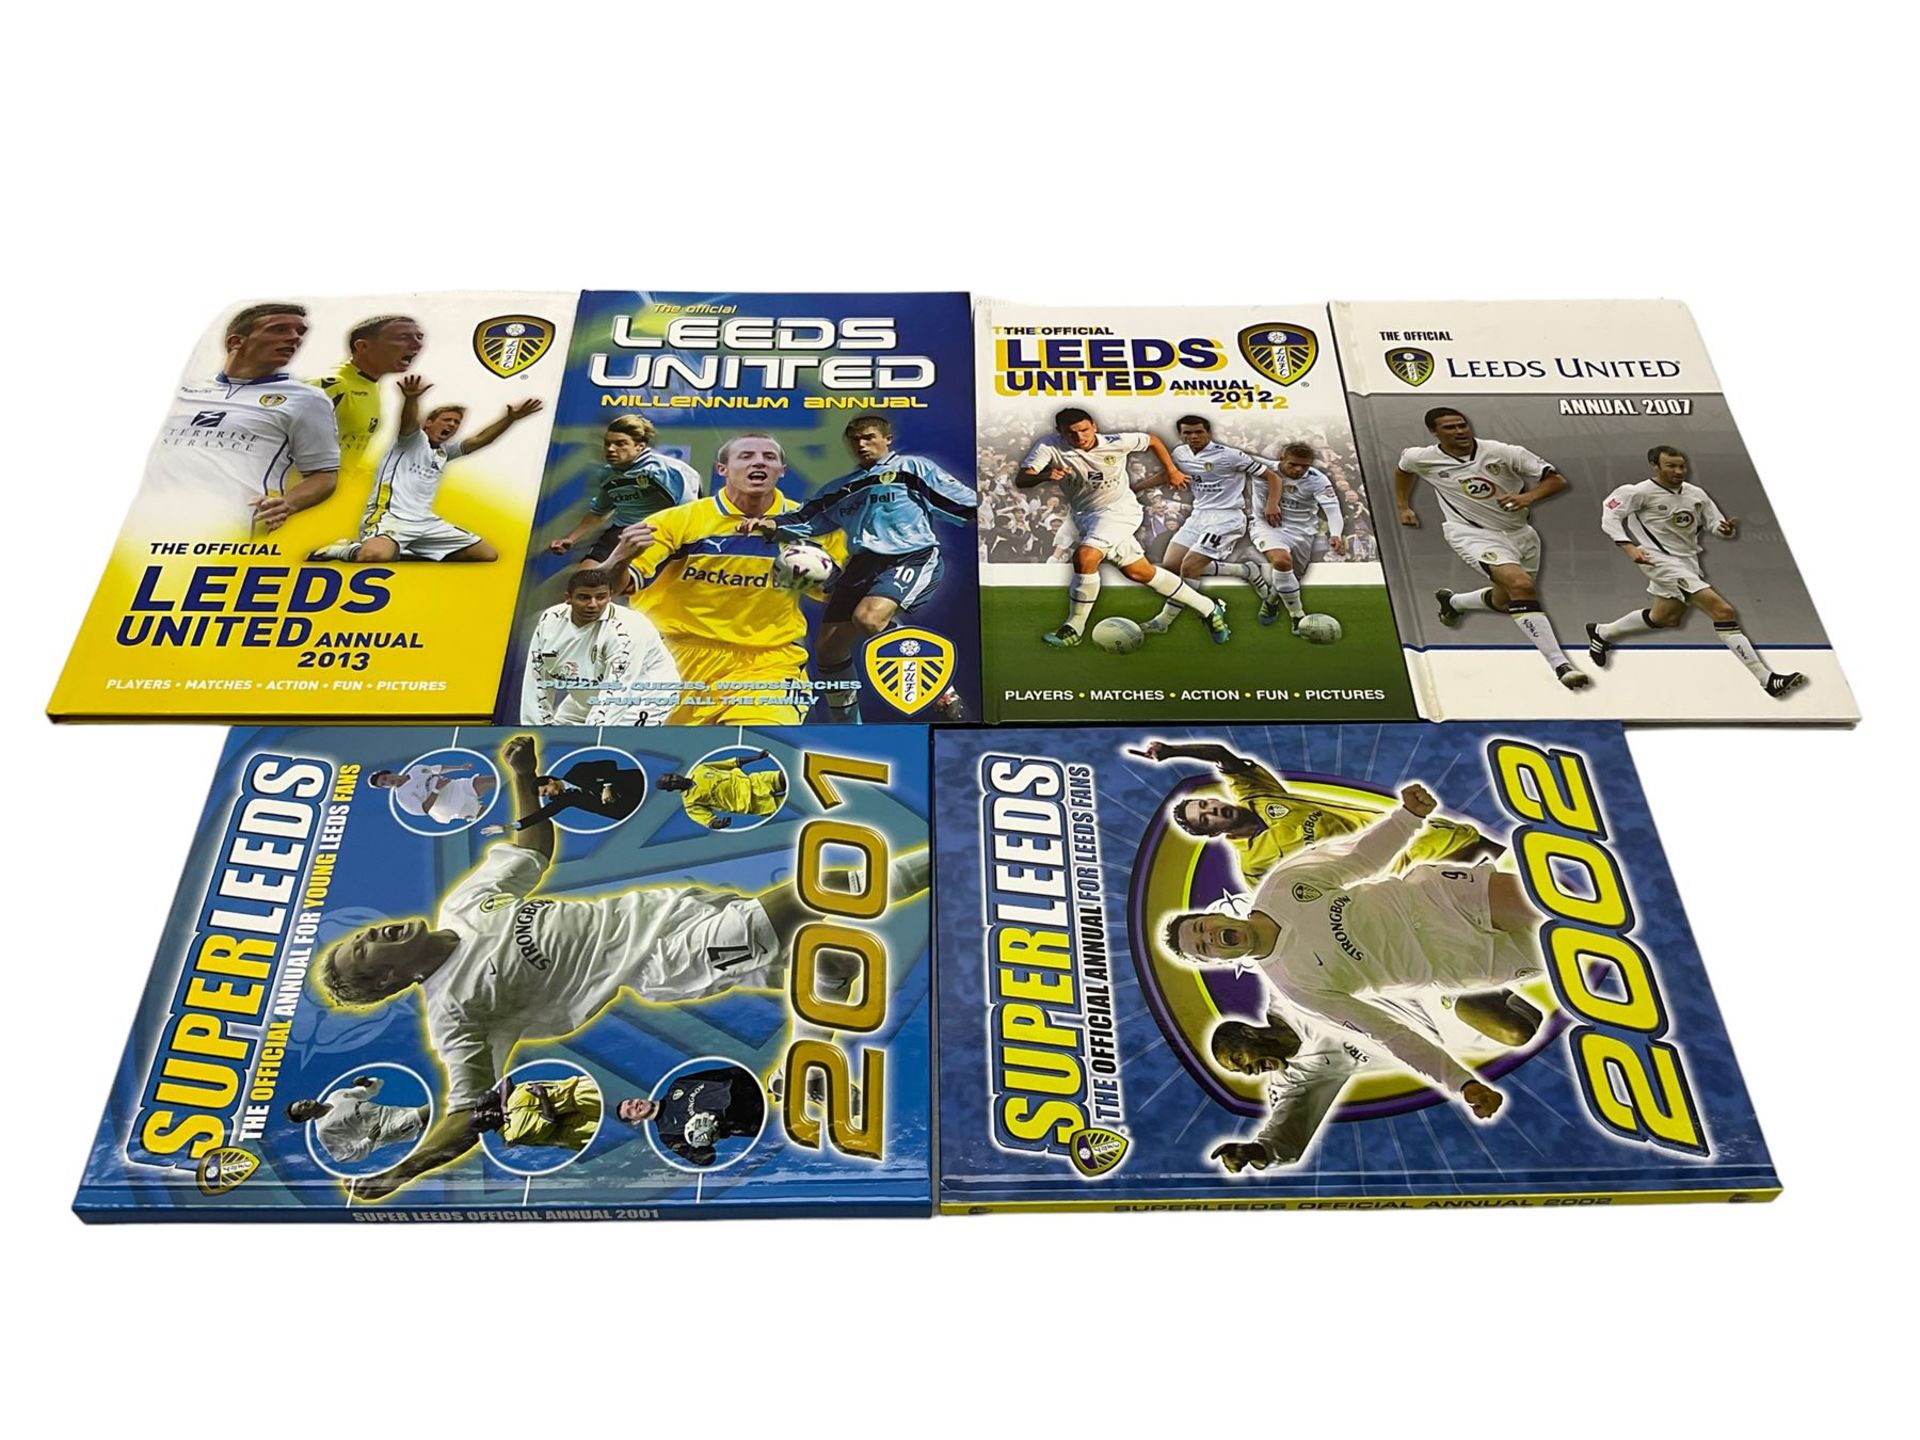 Leeds United football club - eighteen 'The Official Leeds United Annual' comprising 2000 - Image 2 of 4